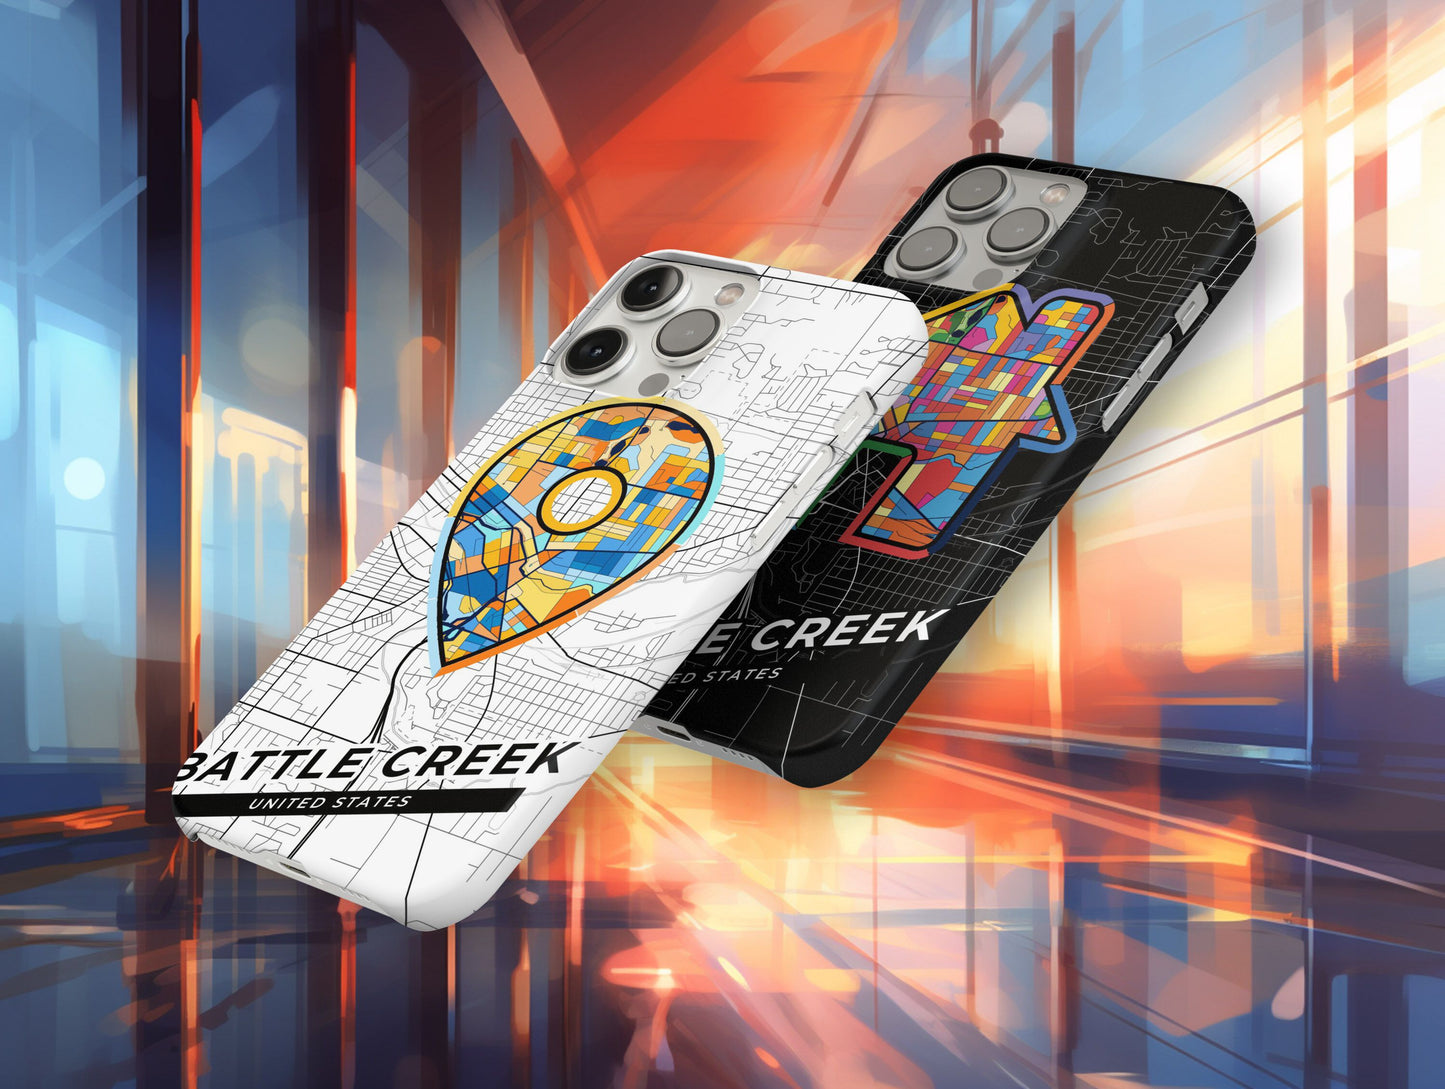 Battle Creek Michigan slim phone case with colorful icon. Birthday, wedding or housewarming gift. Couple match cases.